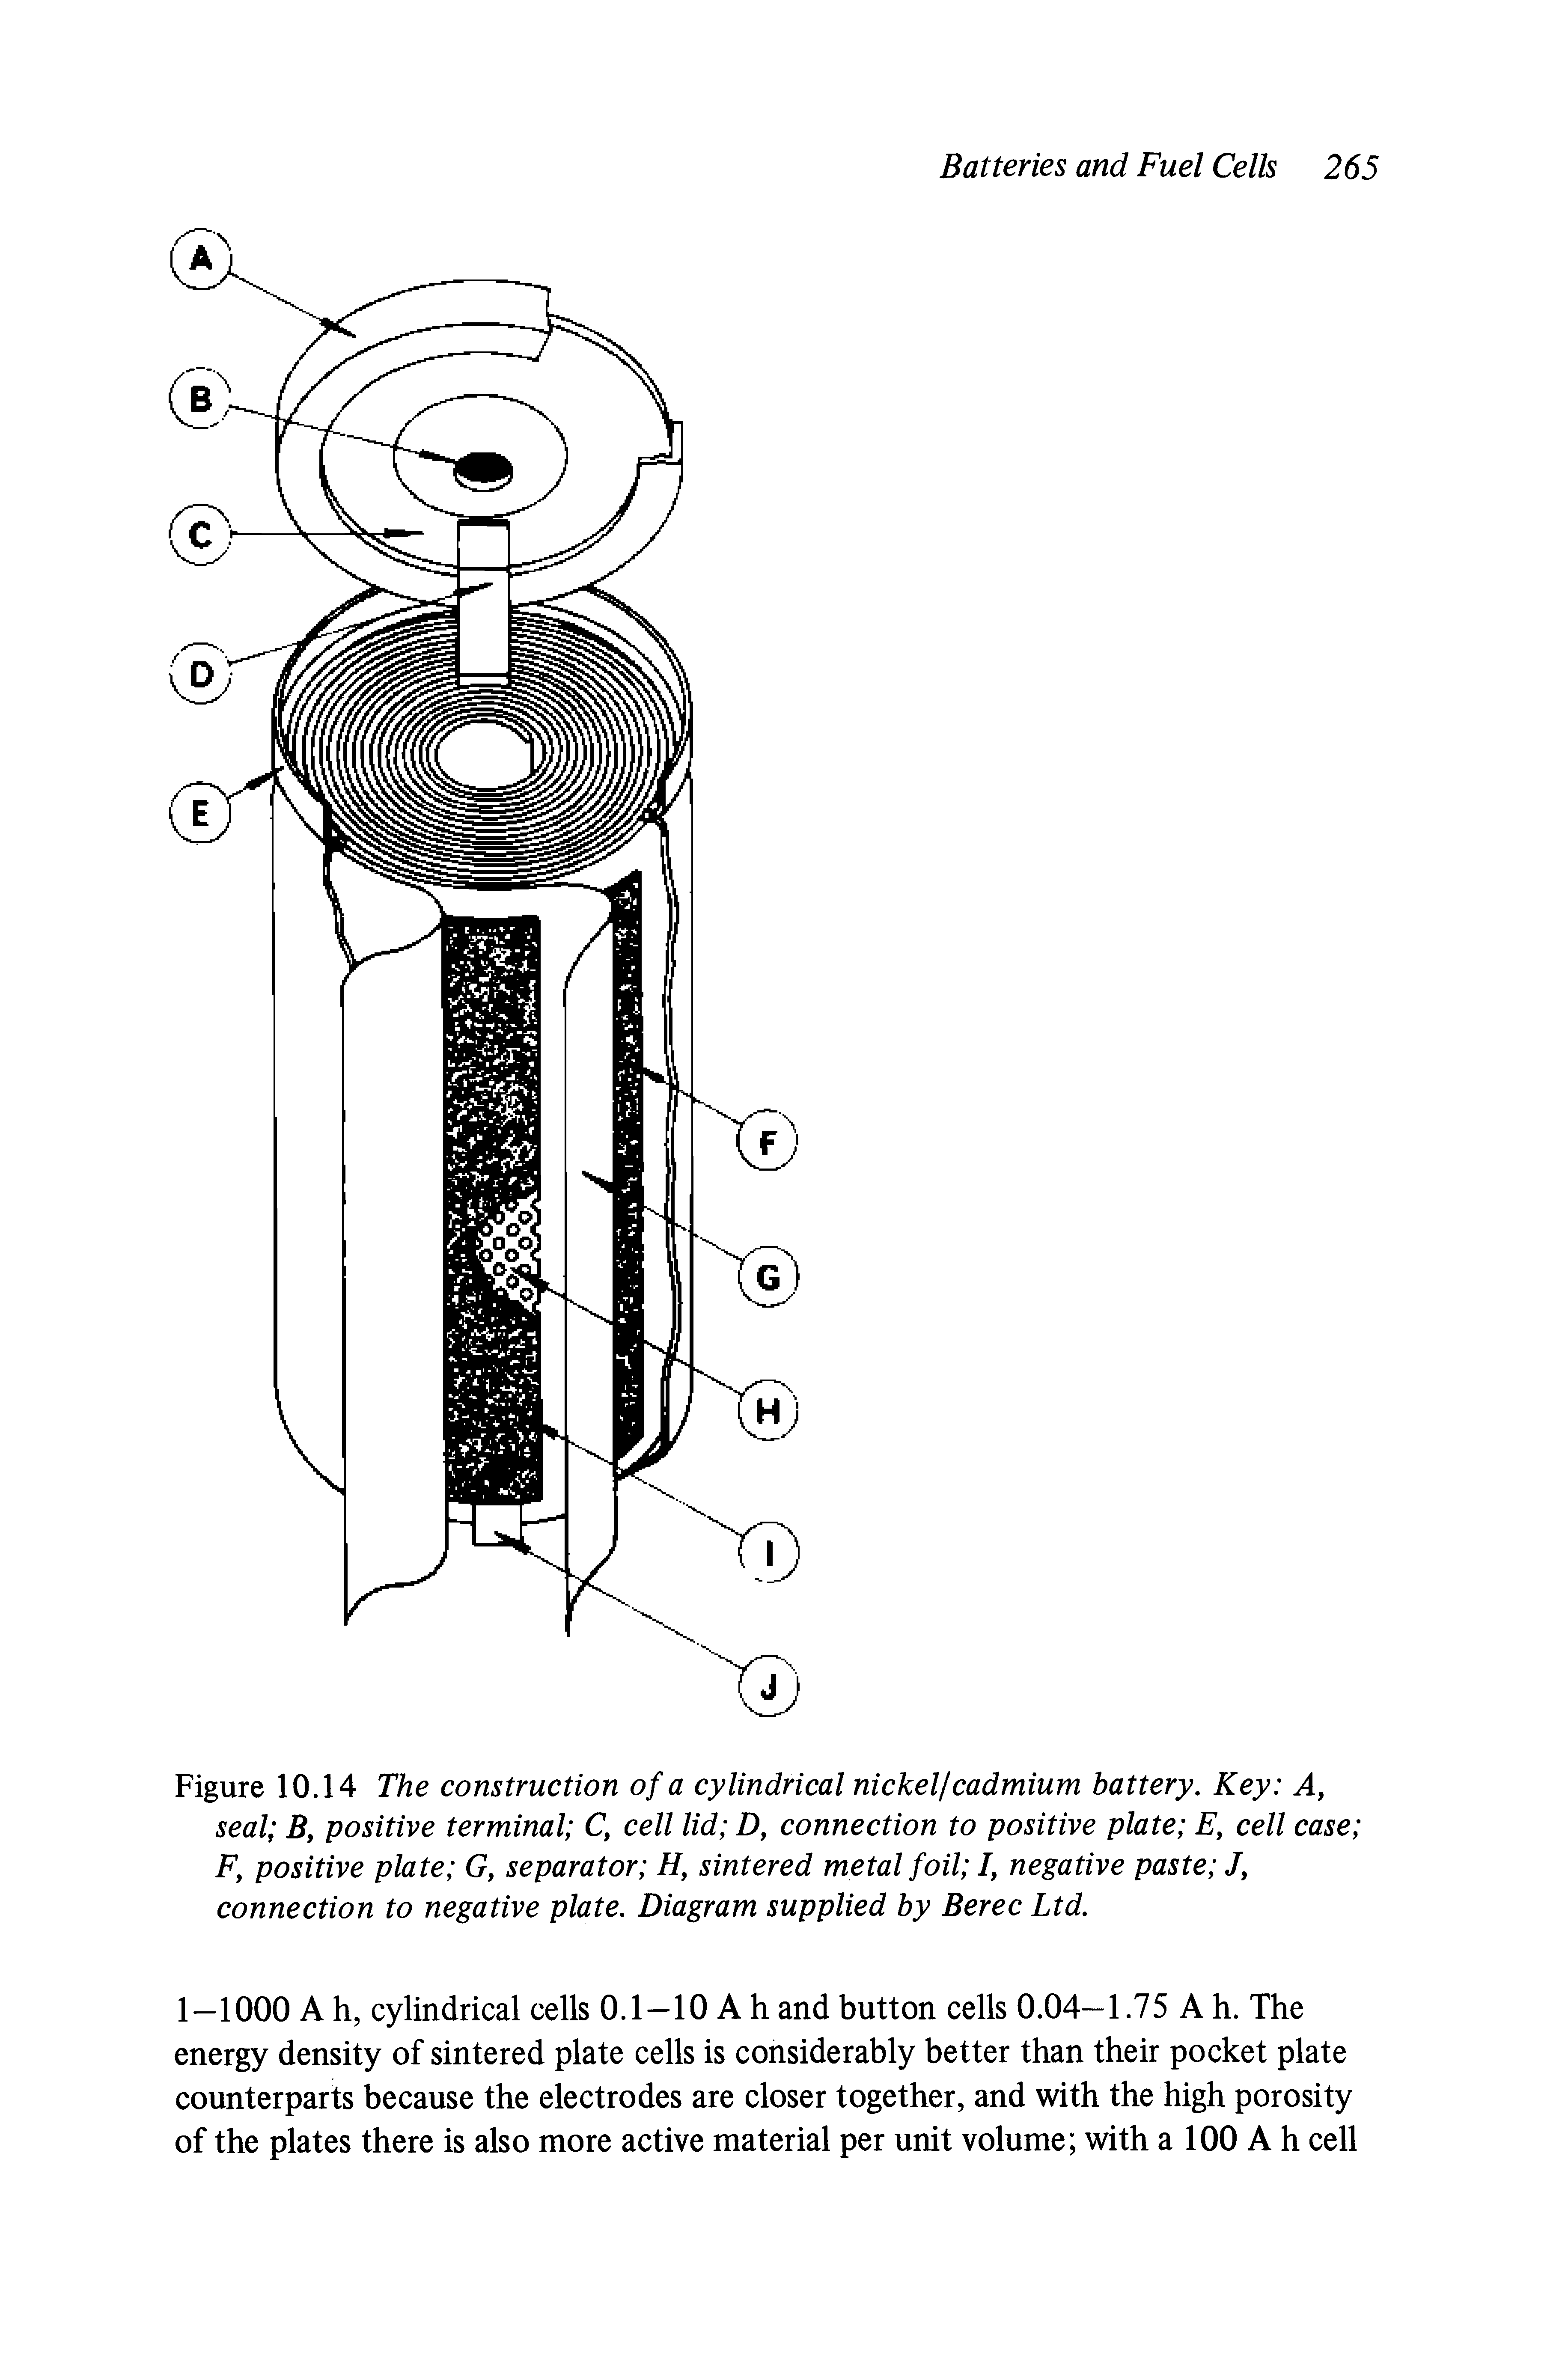 Figure 10.14 The construction of a cylindrical nickel/ cadmium battery. Key A, seal By positive terminal C, cell lid D, connection to positive plate E, cell case Fy positive plate G, separator H, sintered metal foil Iy negative paste Jy connection to negative plate. Diagram supplied by Berec Ltd.